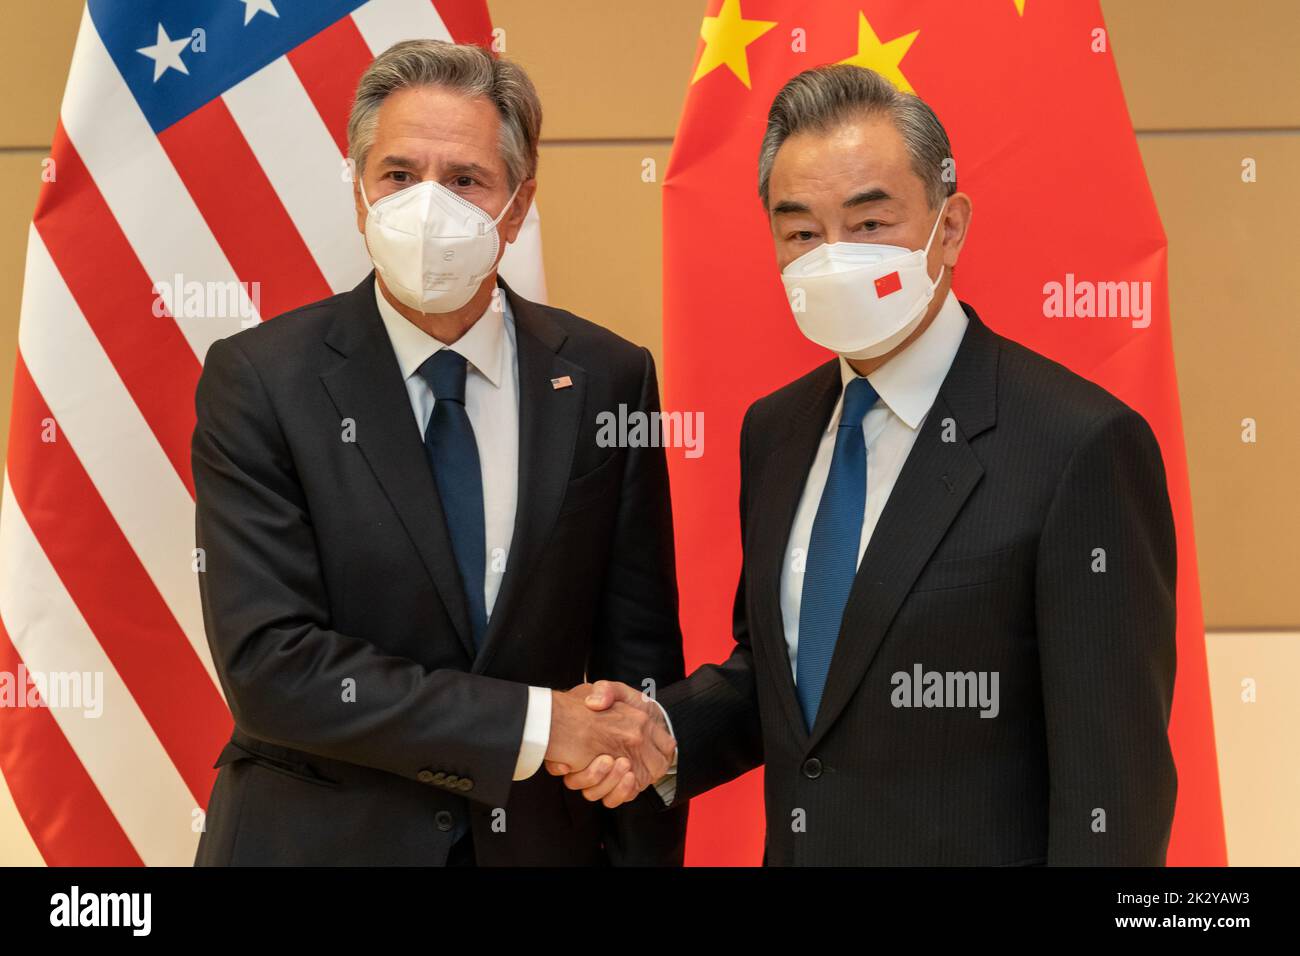 New York City, United States. 23rd Sep, 2022. U.S. Secretary of State Tony Blinken, left, shakes hands with Chinese State Counselor and Foreign Minister Wang Yi, right, before the start of their bilateral meeting on the sidelines of the 77th Session of the U.N General Assembly, September 23, 2022, in New York City. Credit: Ron Przysucha/State Department Photo/Alamy Live News Stock Photo